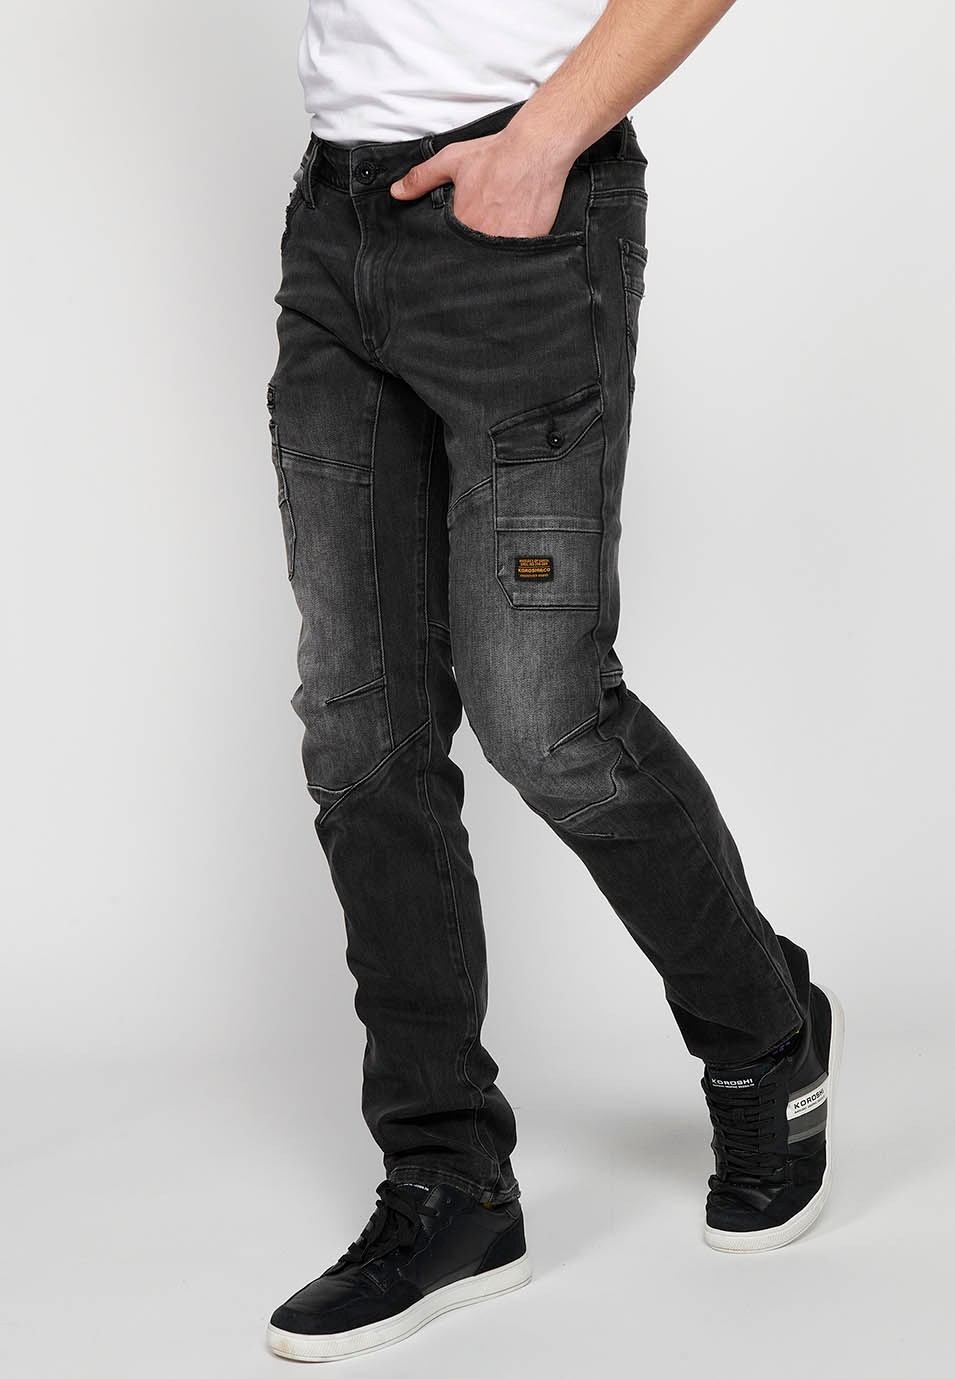 Long denim pants with front closure with zipper and button and pockets, two sides in Black for Men 3